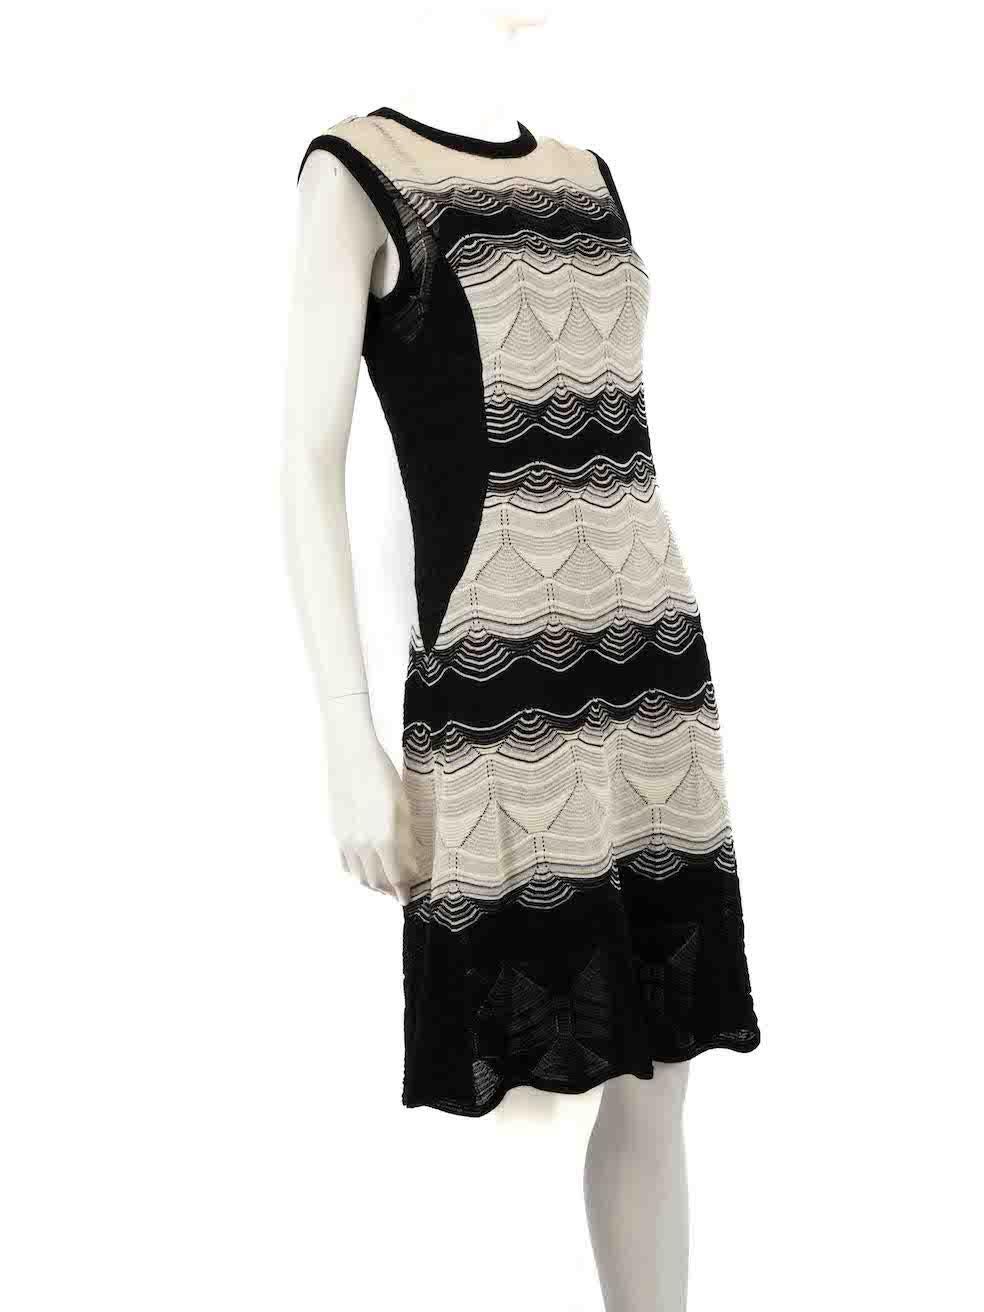 CONDITION is Very good. Hardly any visible wear to dress is evident on this used M by Missoni designer resale item. Come with sewn in slip.
 
 
 
 Details
 
 
 Two tone- black, white
 
 Synthetic
 
 Knit dress
 
 Sleeveless
 
 Midi
 
 Striped